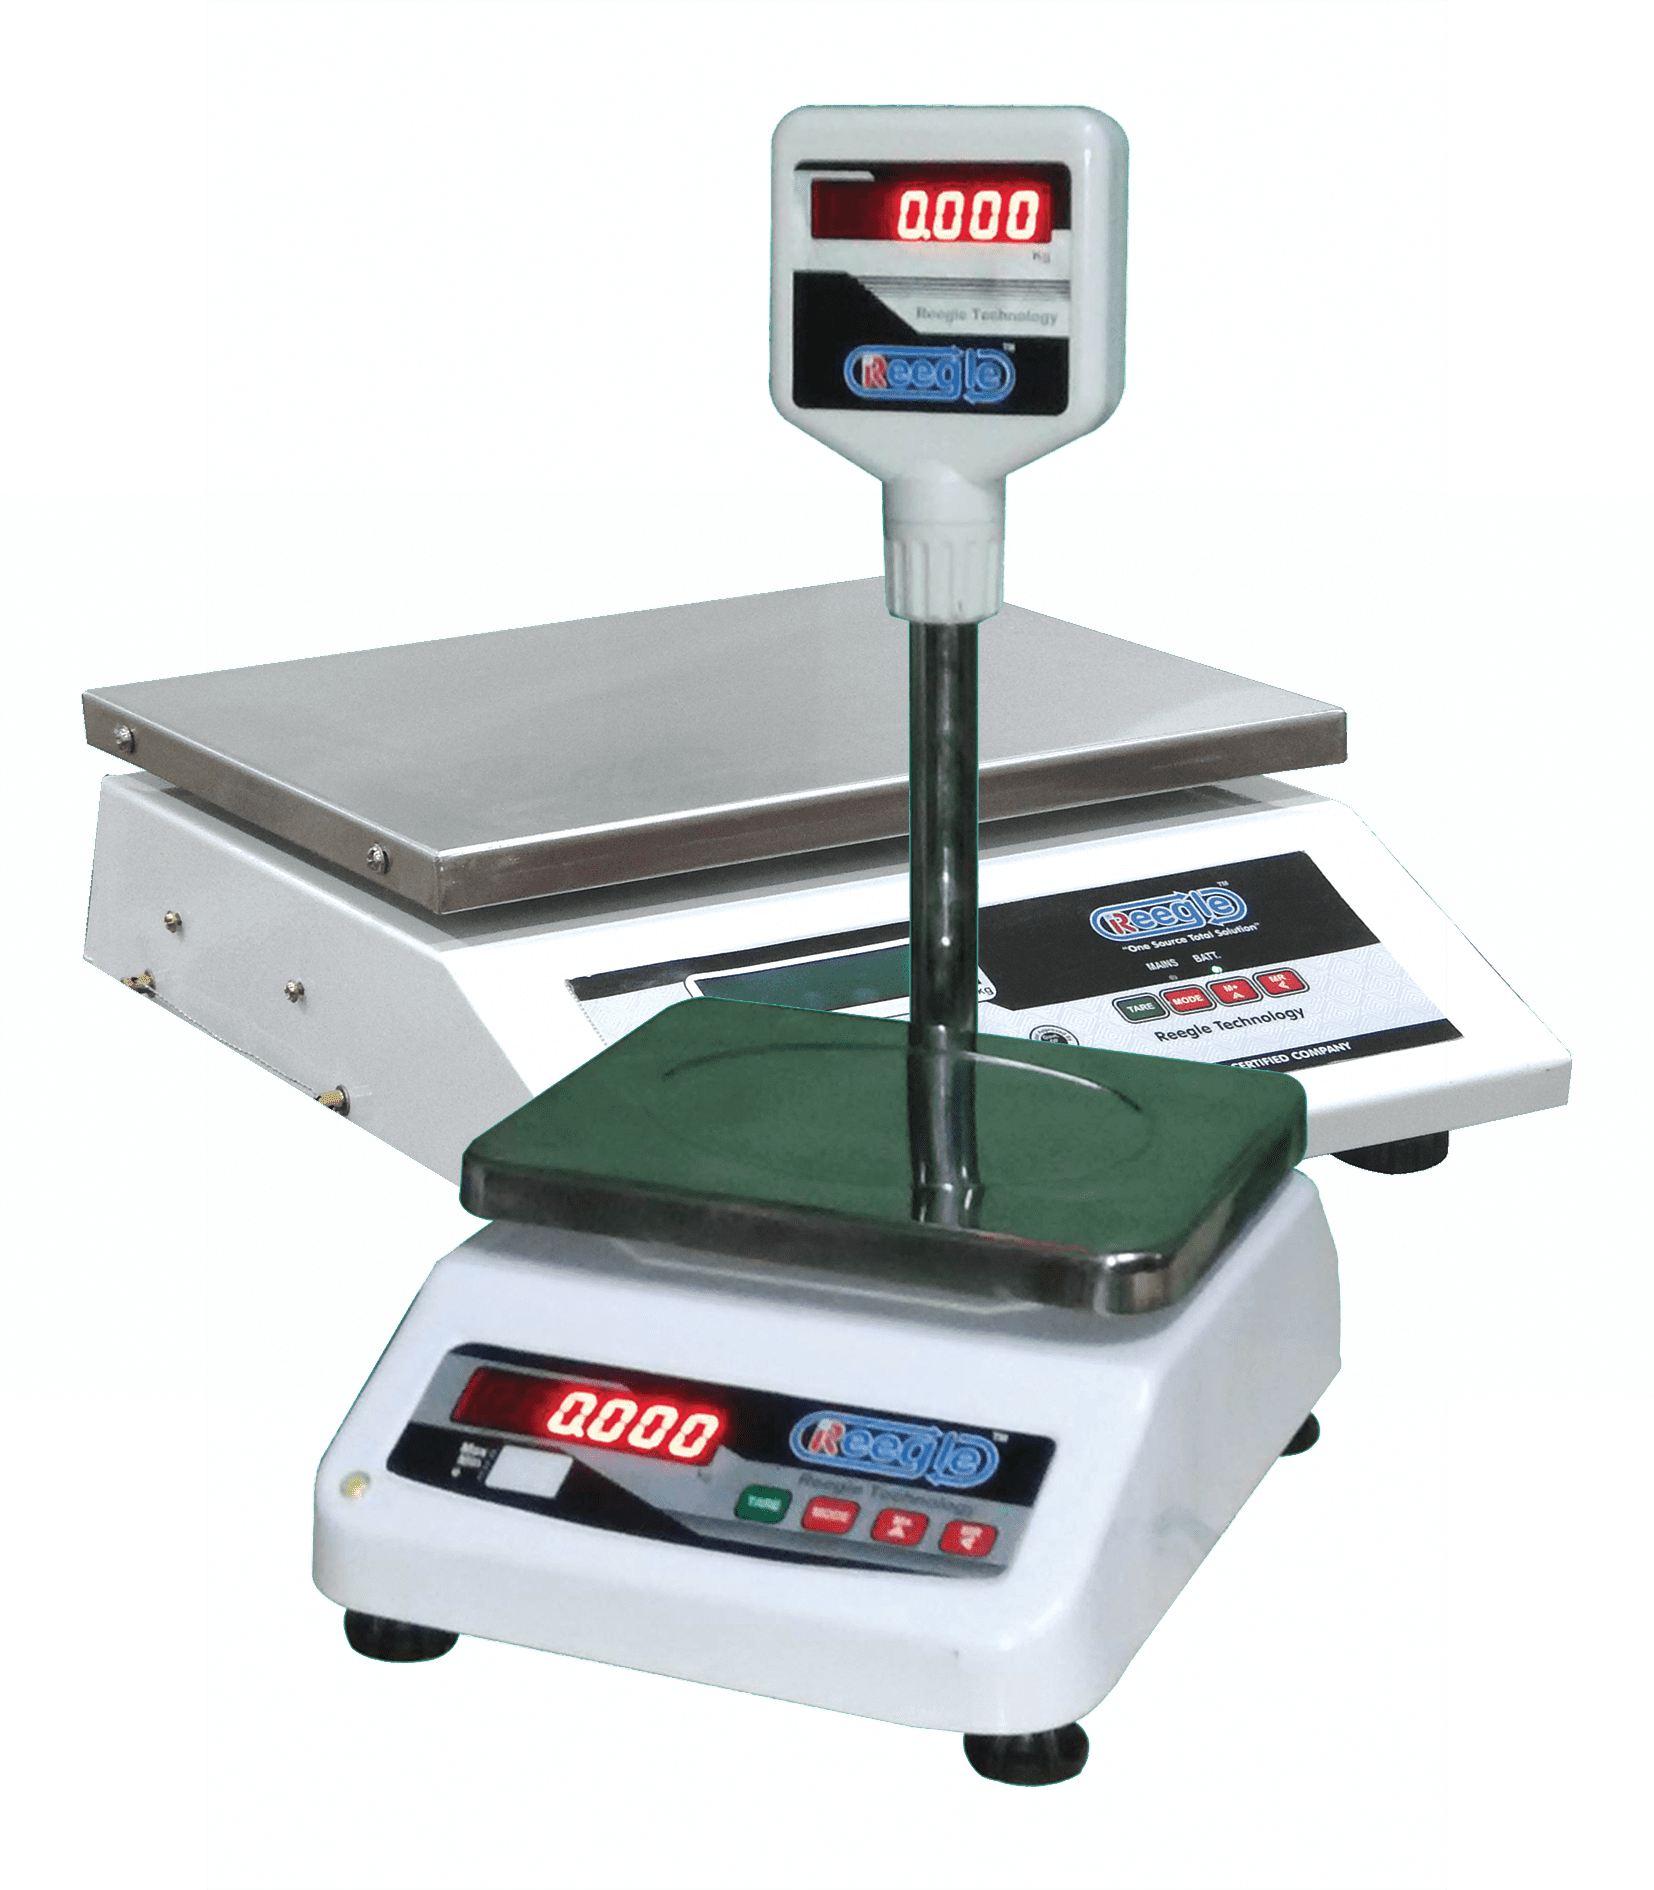 Retail weighing solutions, Commercial Weighing Scales, Industrial Weighing Systems